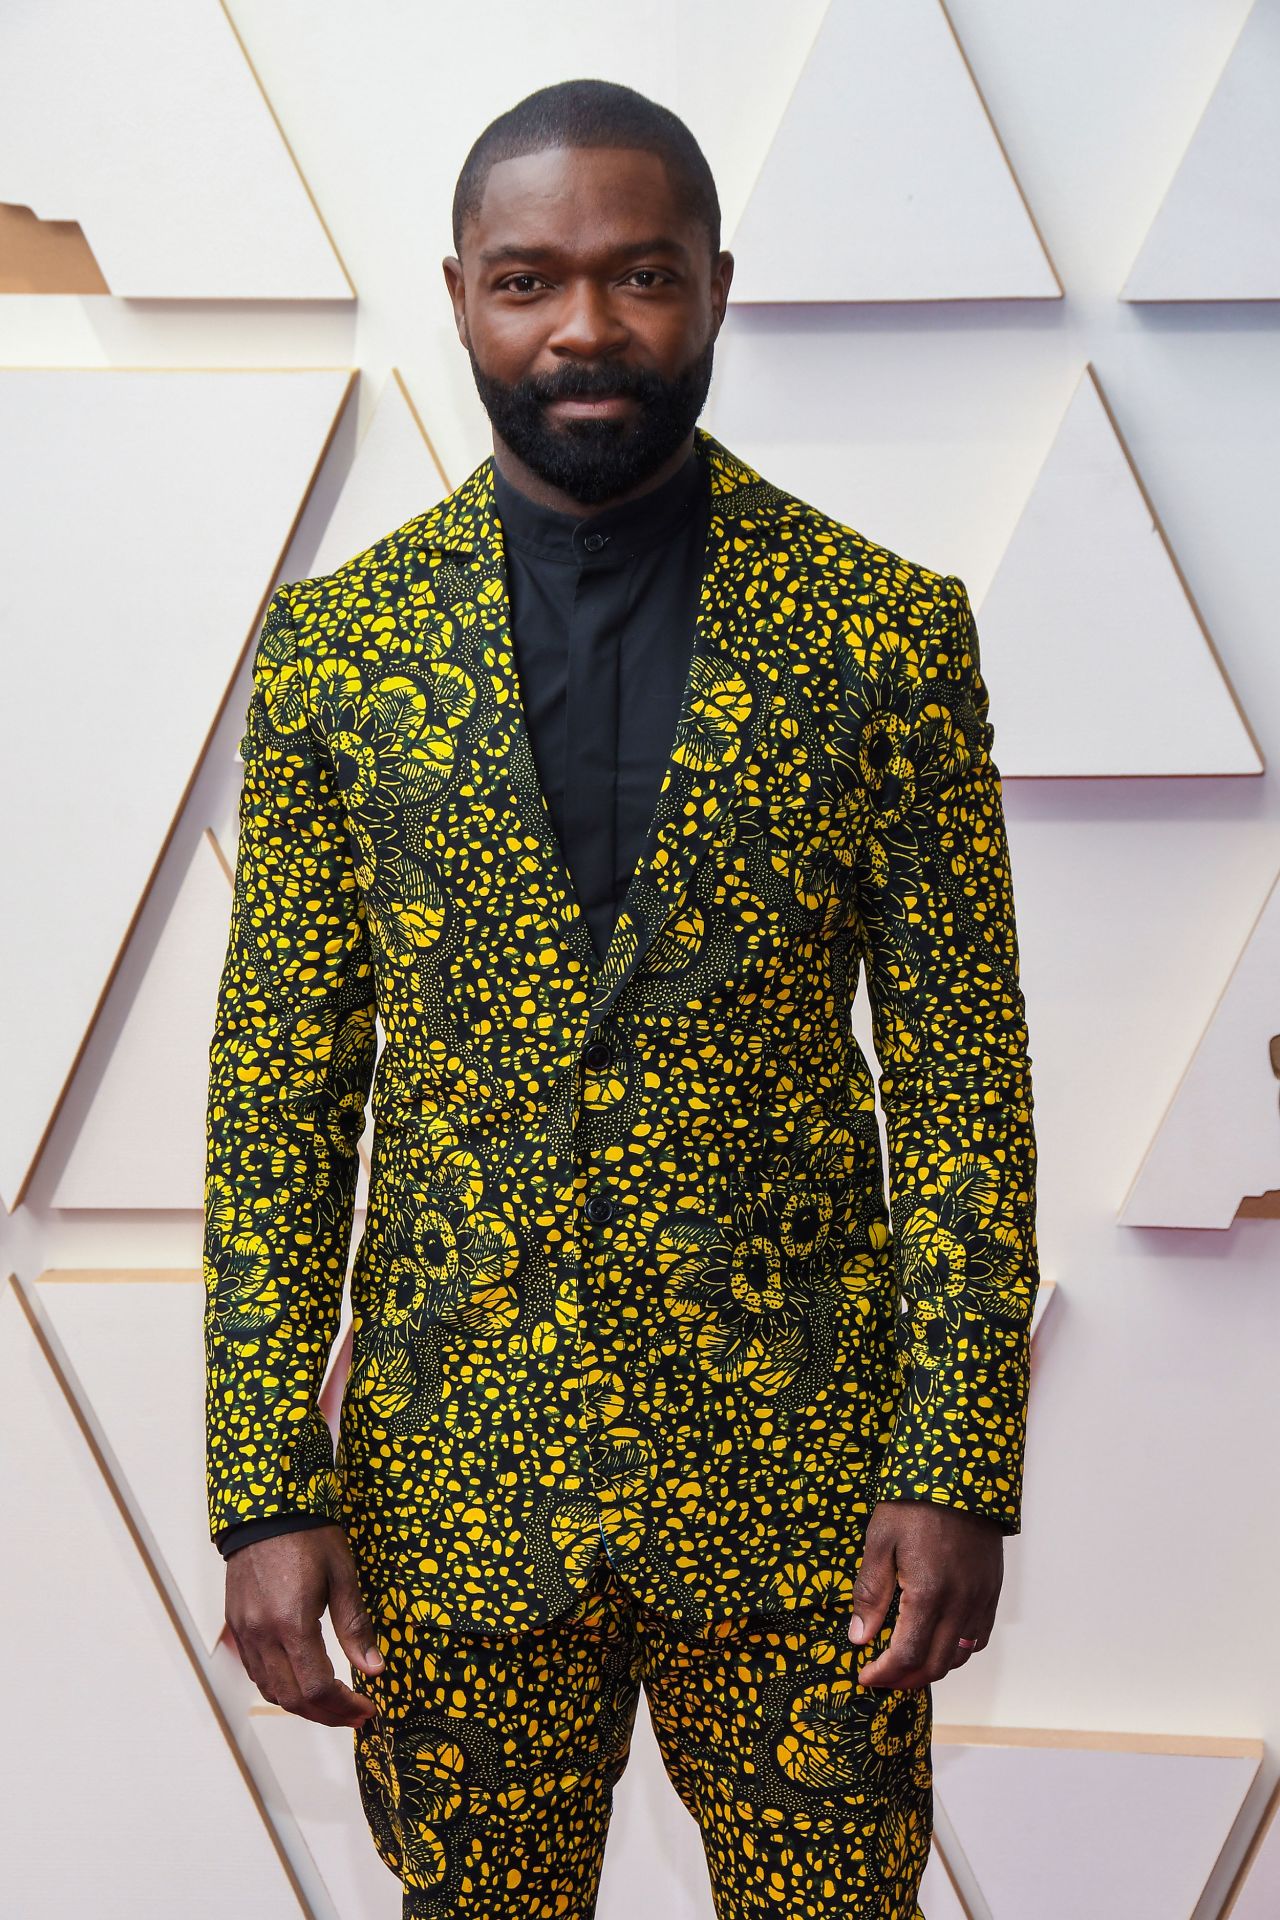 David Oyelowo eschewed the black suit for an ornately patterned one.